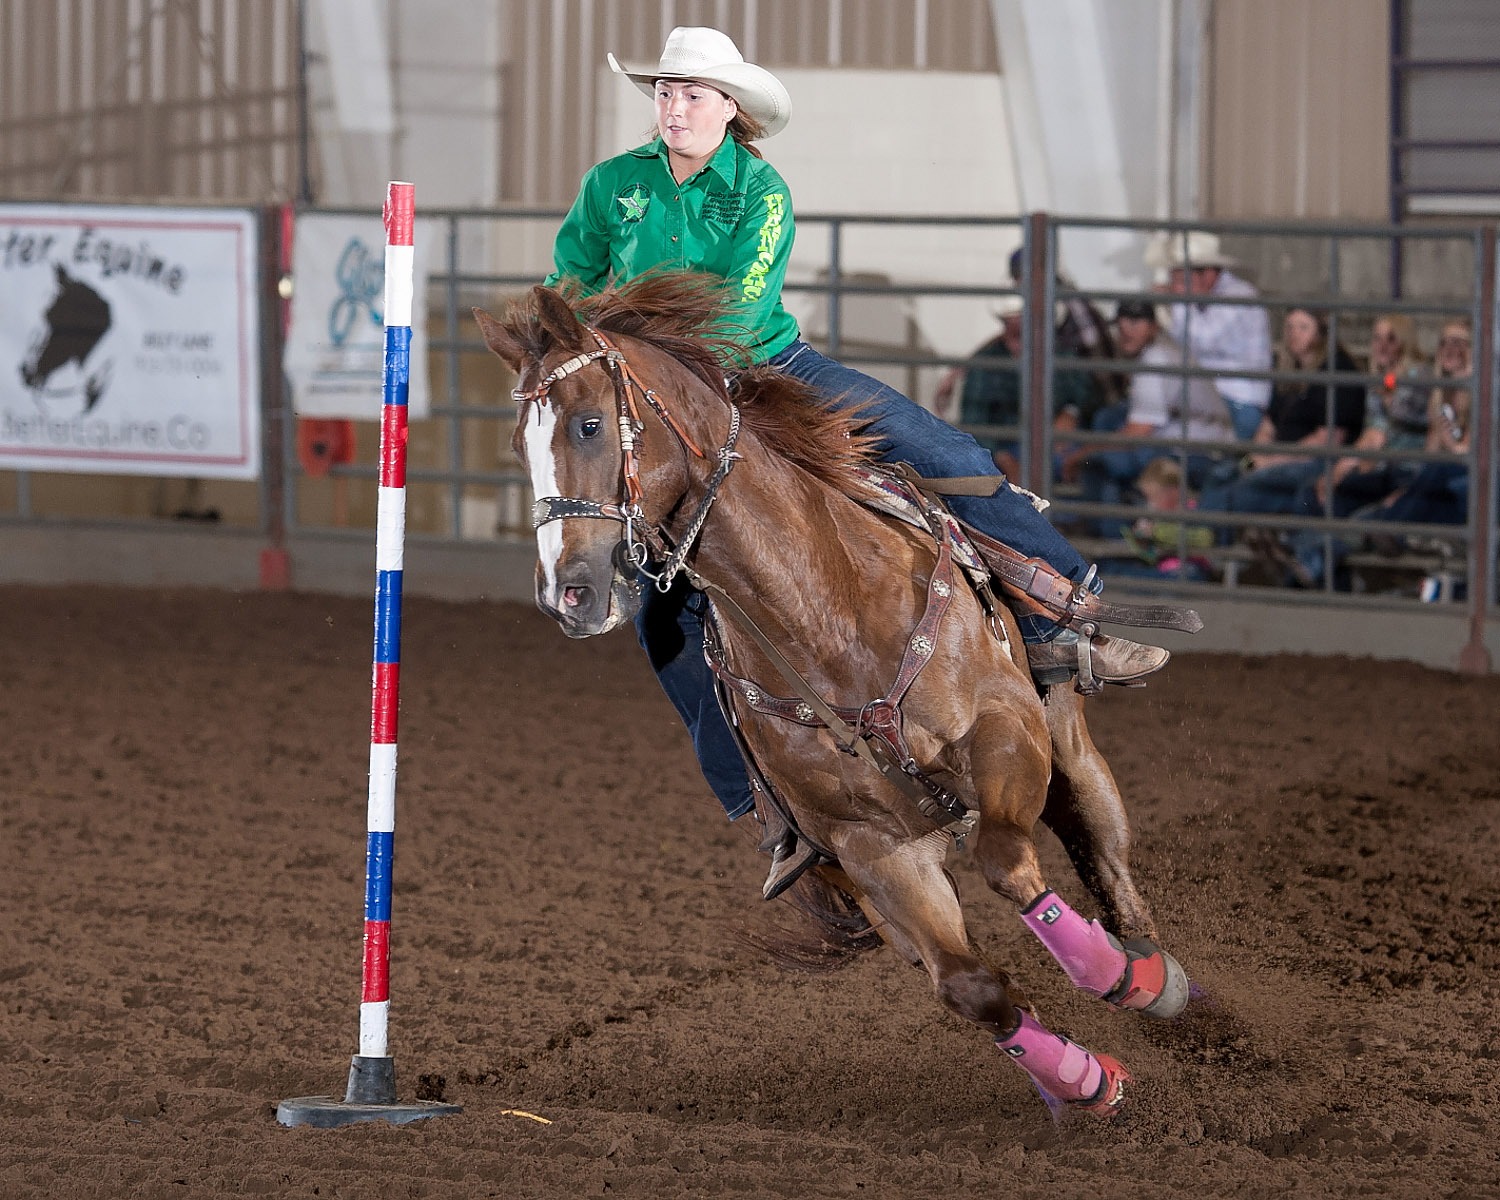 Shelby Whiting, Paola, was the yearend champion in pole bending following the Kansas High School Rodeo Finals at Topeka. (Photo courtesy Kent Kerschner, www.fotocowboy.com, kent@fotocowboy.com.)